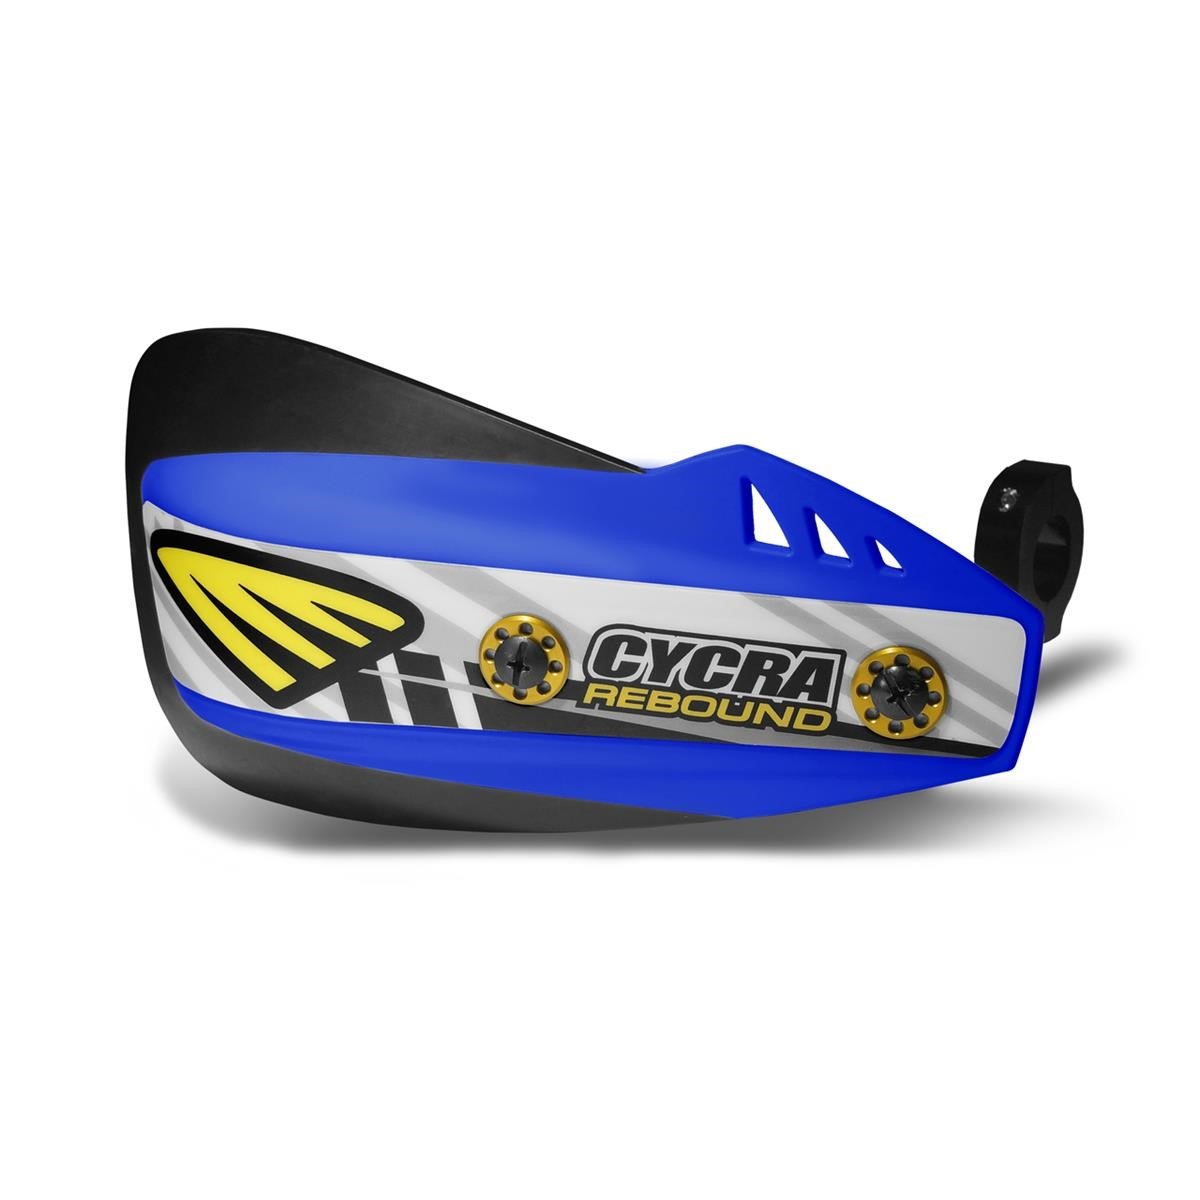 Cycra Handguards Rebound with Patented folding shield, Blue